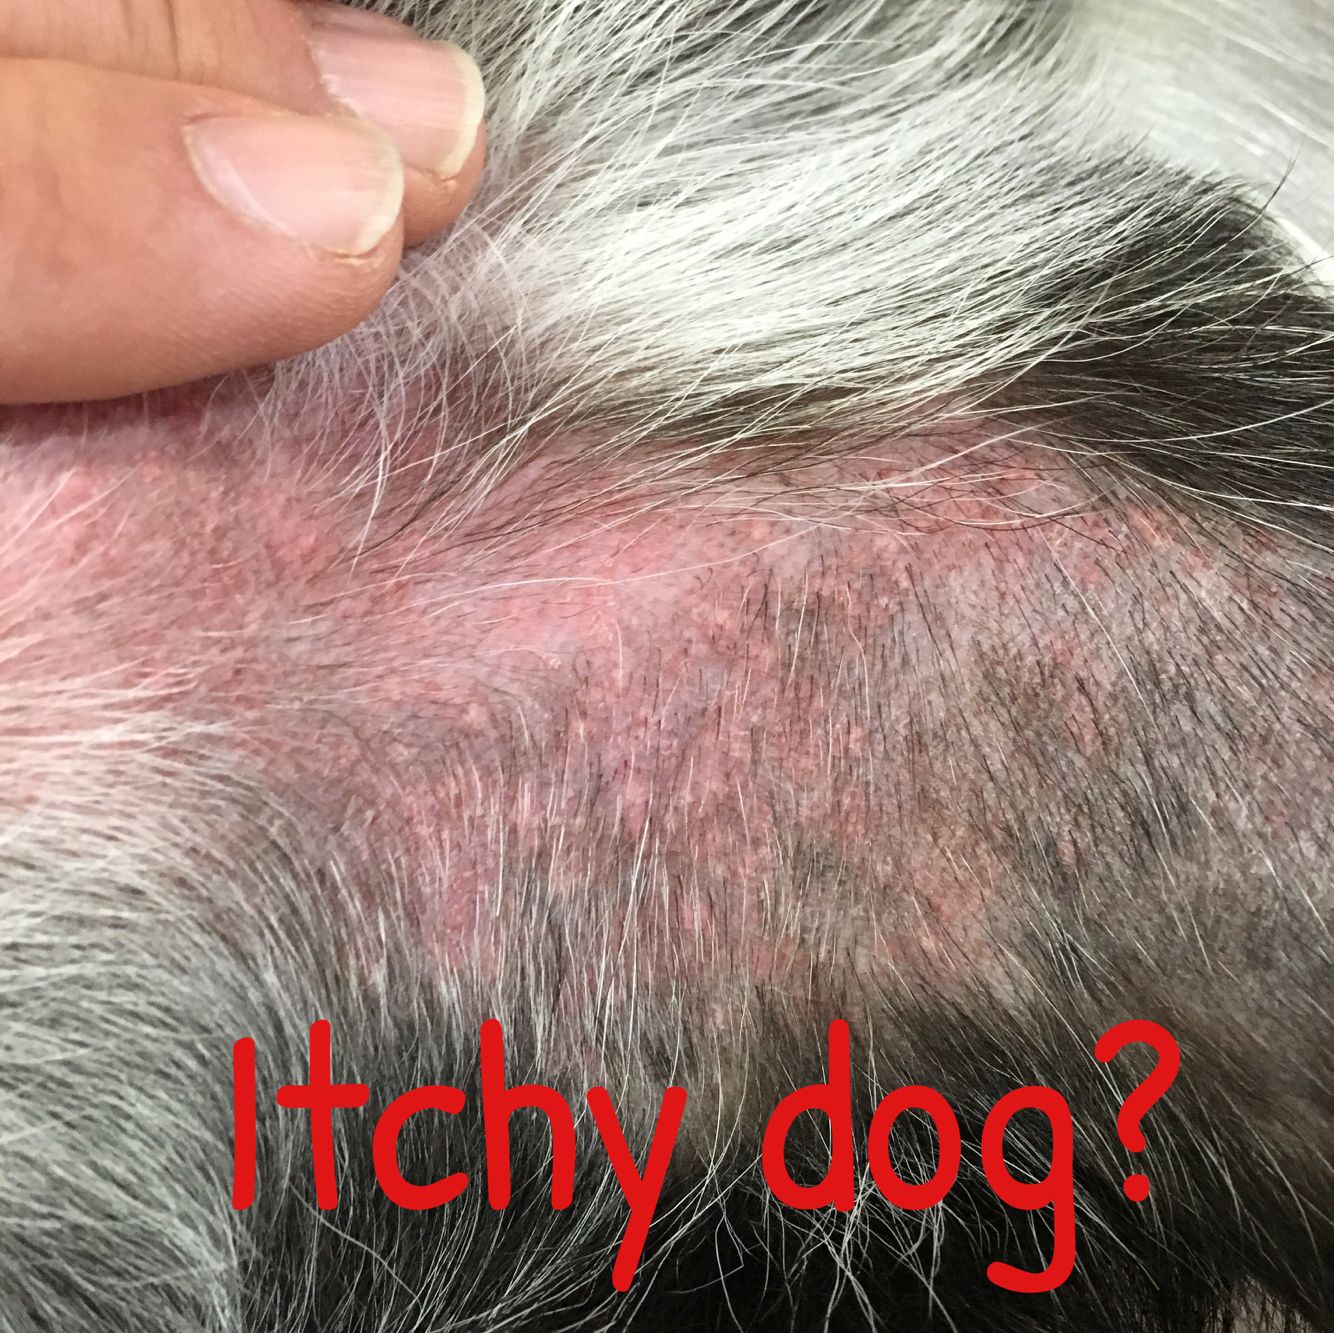 What you can do to soothe your itchy scratchy dog